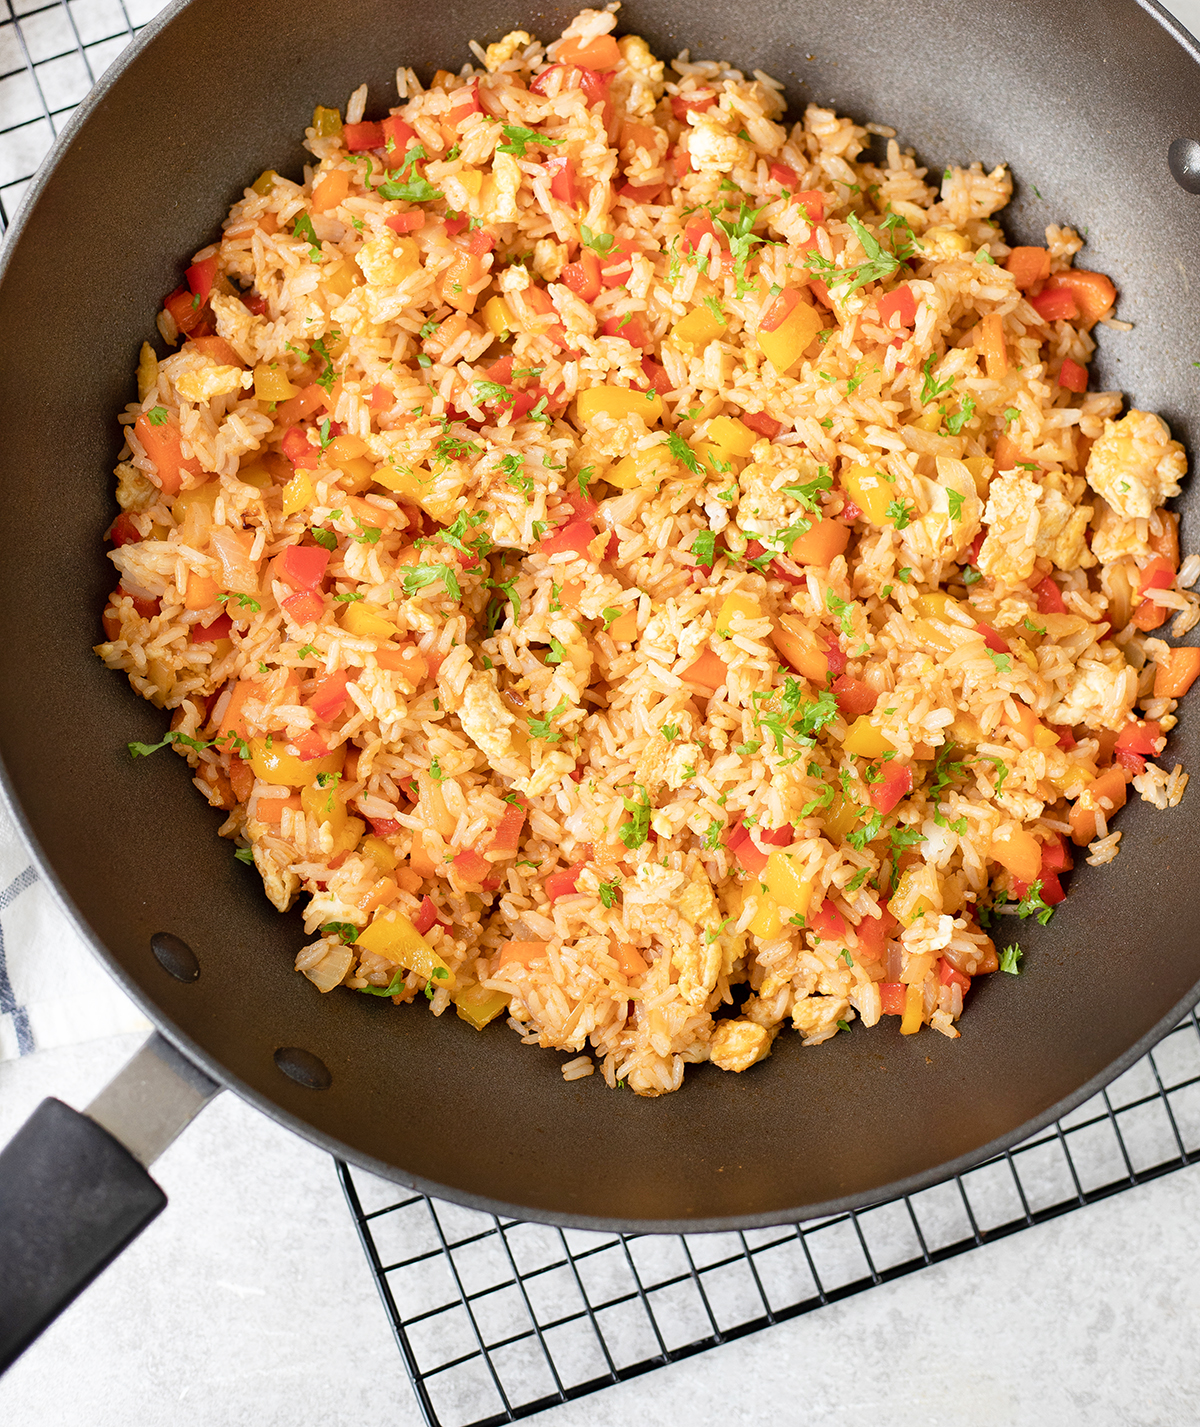 Chinese style egg and vegetable fried rice